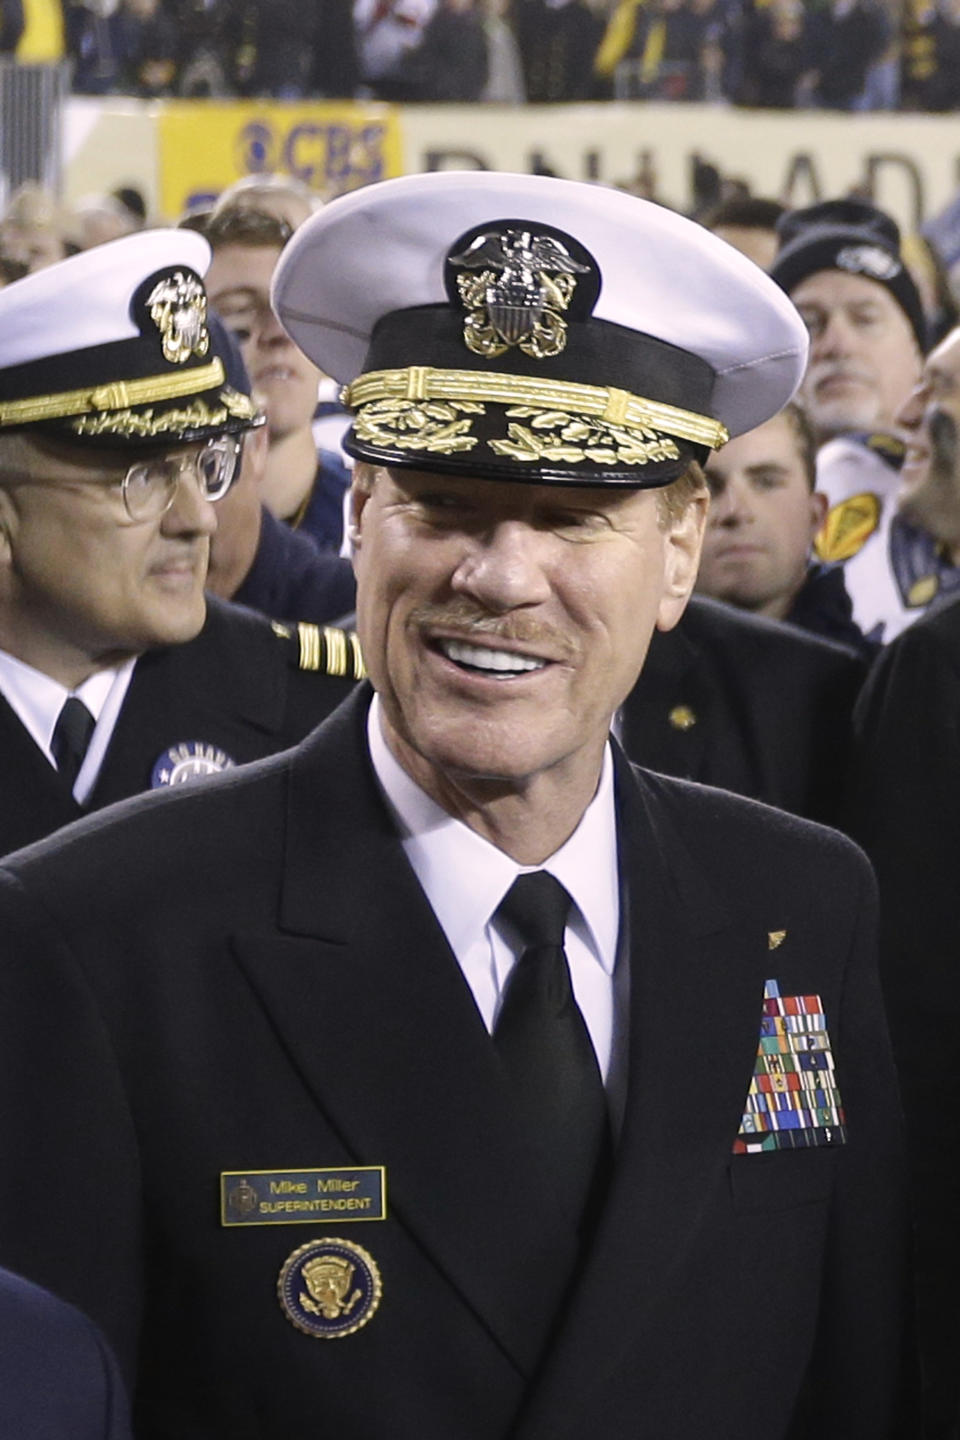 FILE - In this Dec. 8, 2012 file photo, U.S. Naval Academy Superintendent Vice Adm. Michael Miller poses for photographs after the Army-Navy NCAA college football game in Philadelphia. Miller is set to testify Friday as part of a hearing for a student charged in a sexual assault case. Lawyers for the student say political pressure influenced Miller, to pursue charges against the student, Joshua Tate of Nashville, Tenn. (AP Photo/Matt Rourke, File)